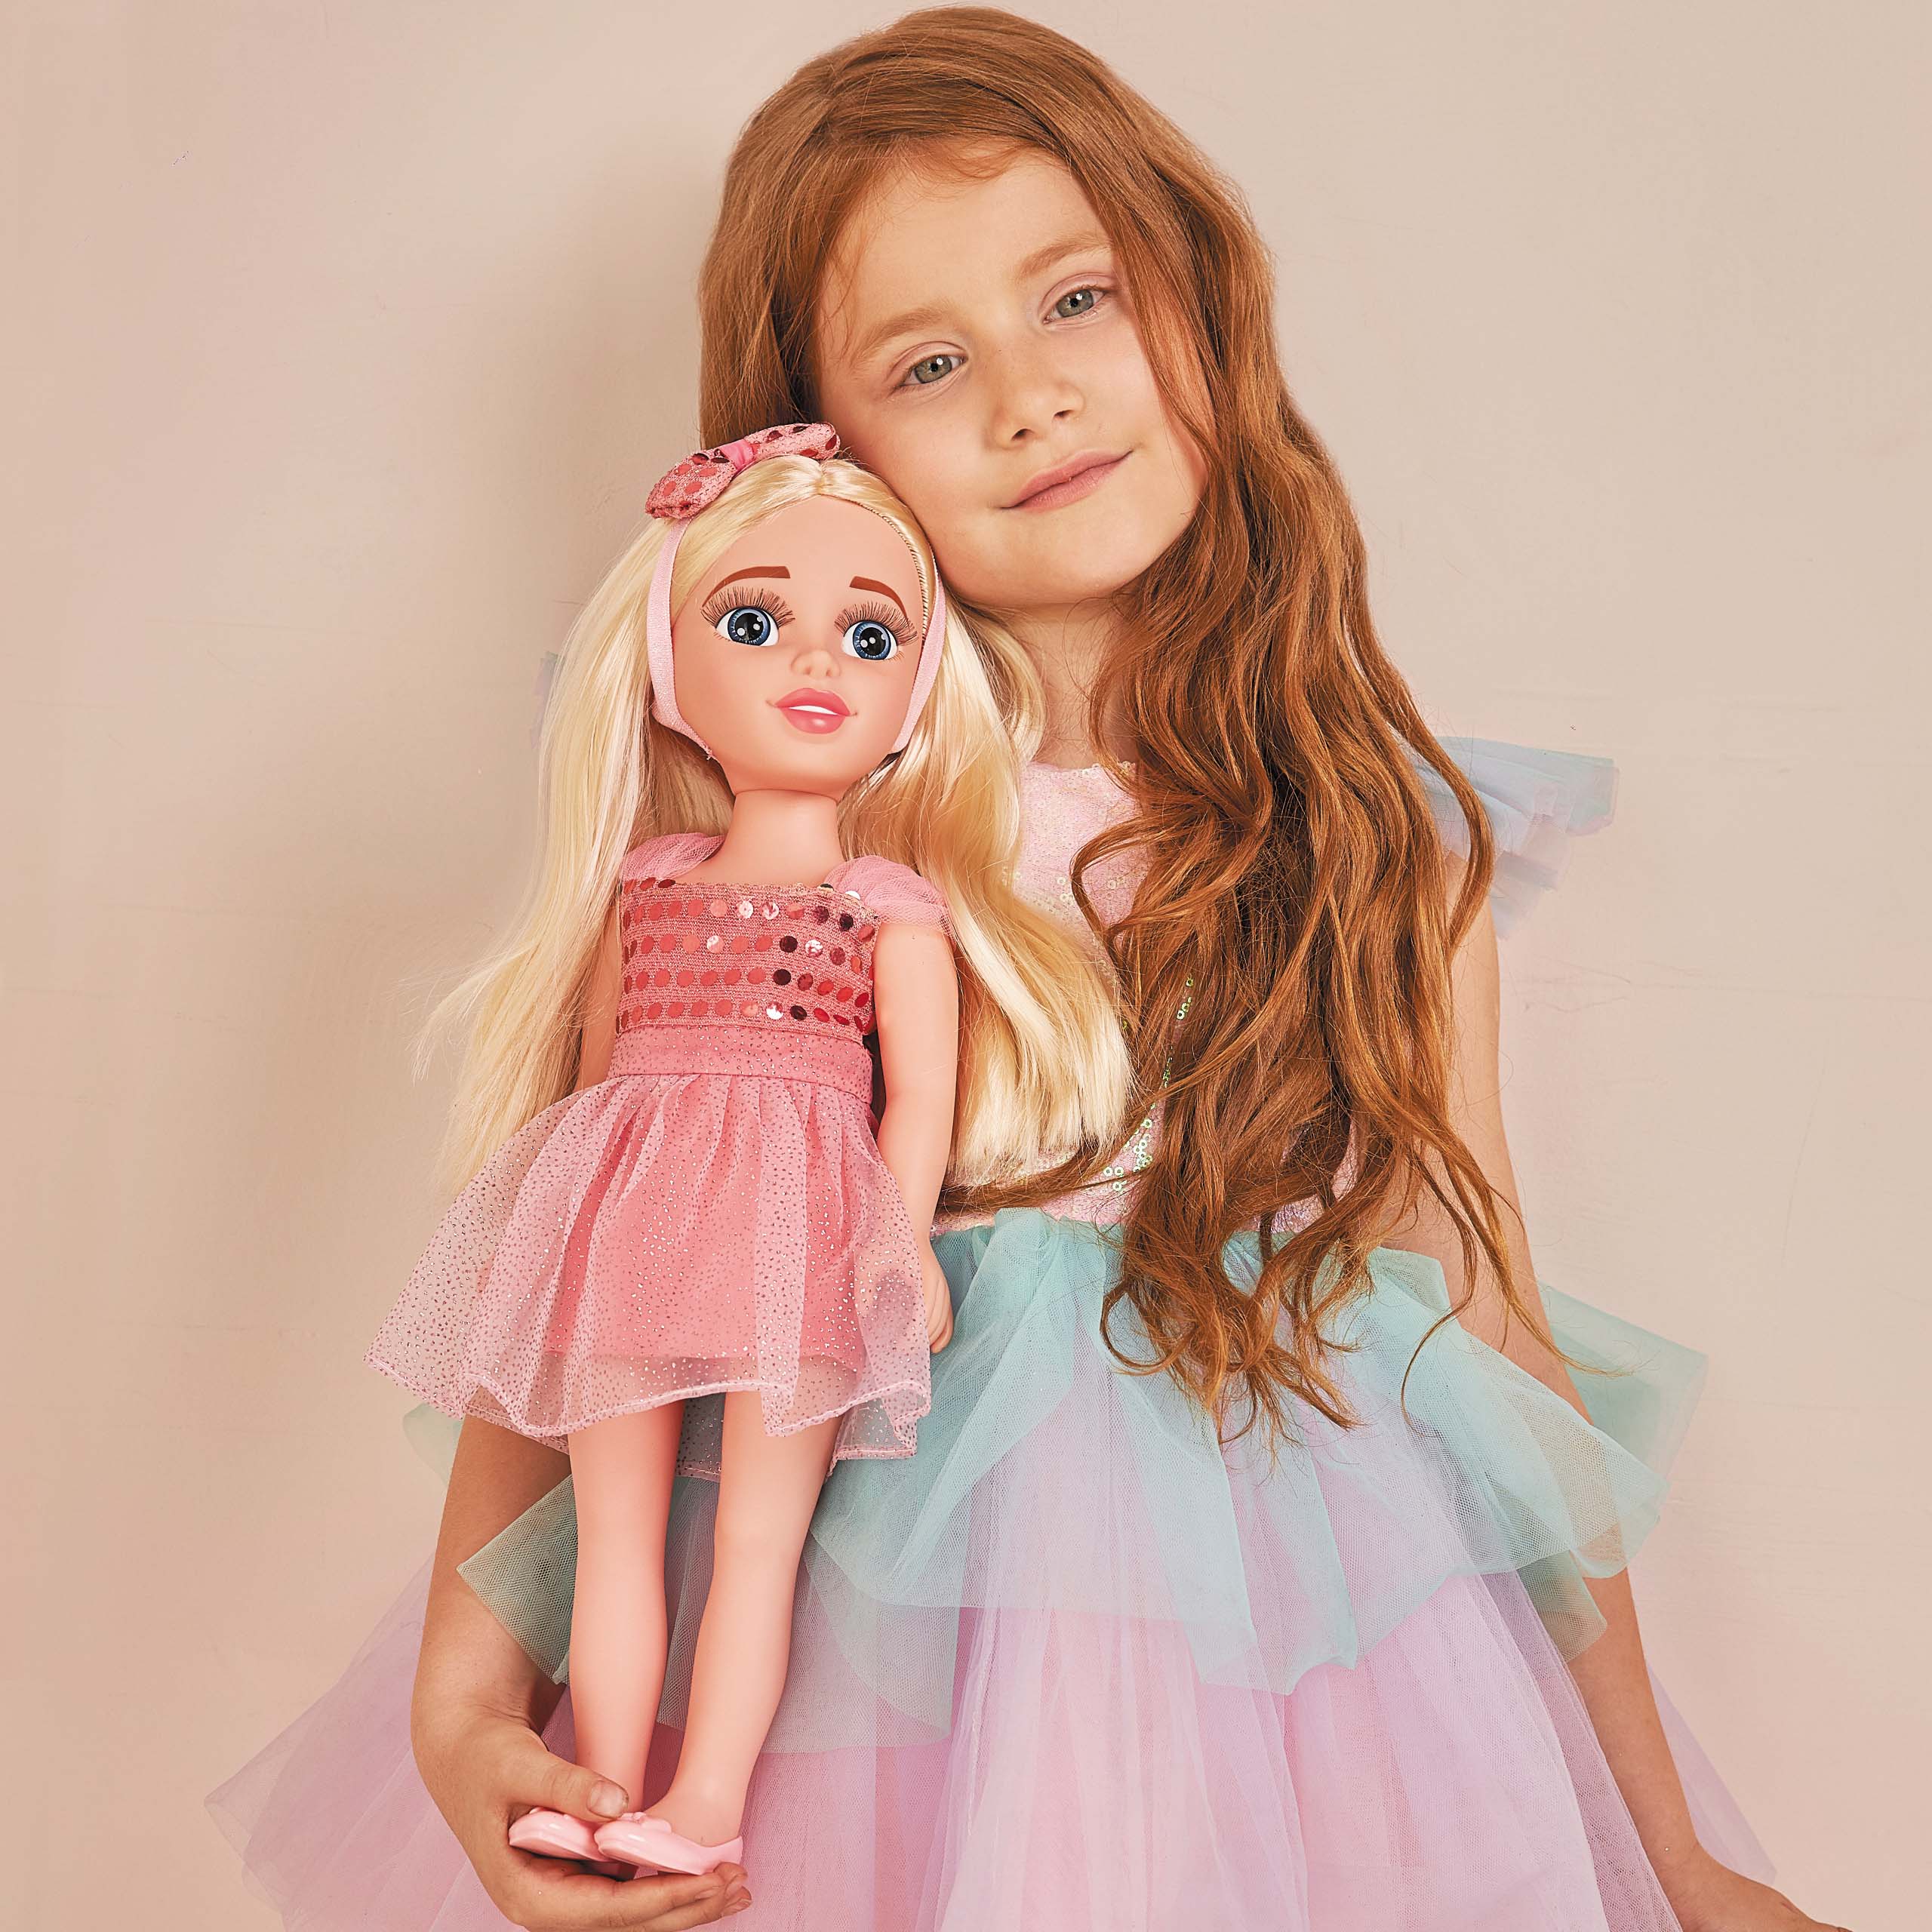 Beauty Star Party Time Pink. Dolls – Where Fashion, Fun Spark Creativity!